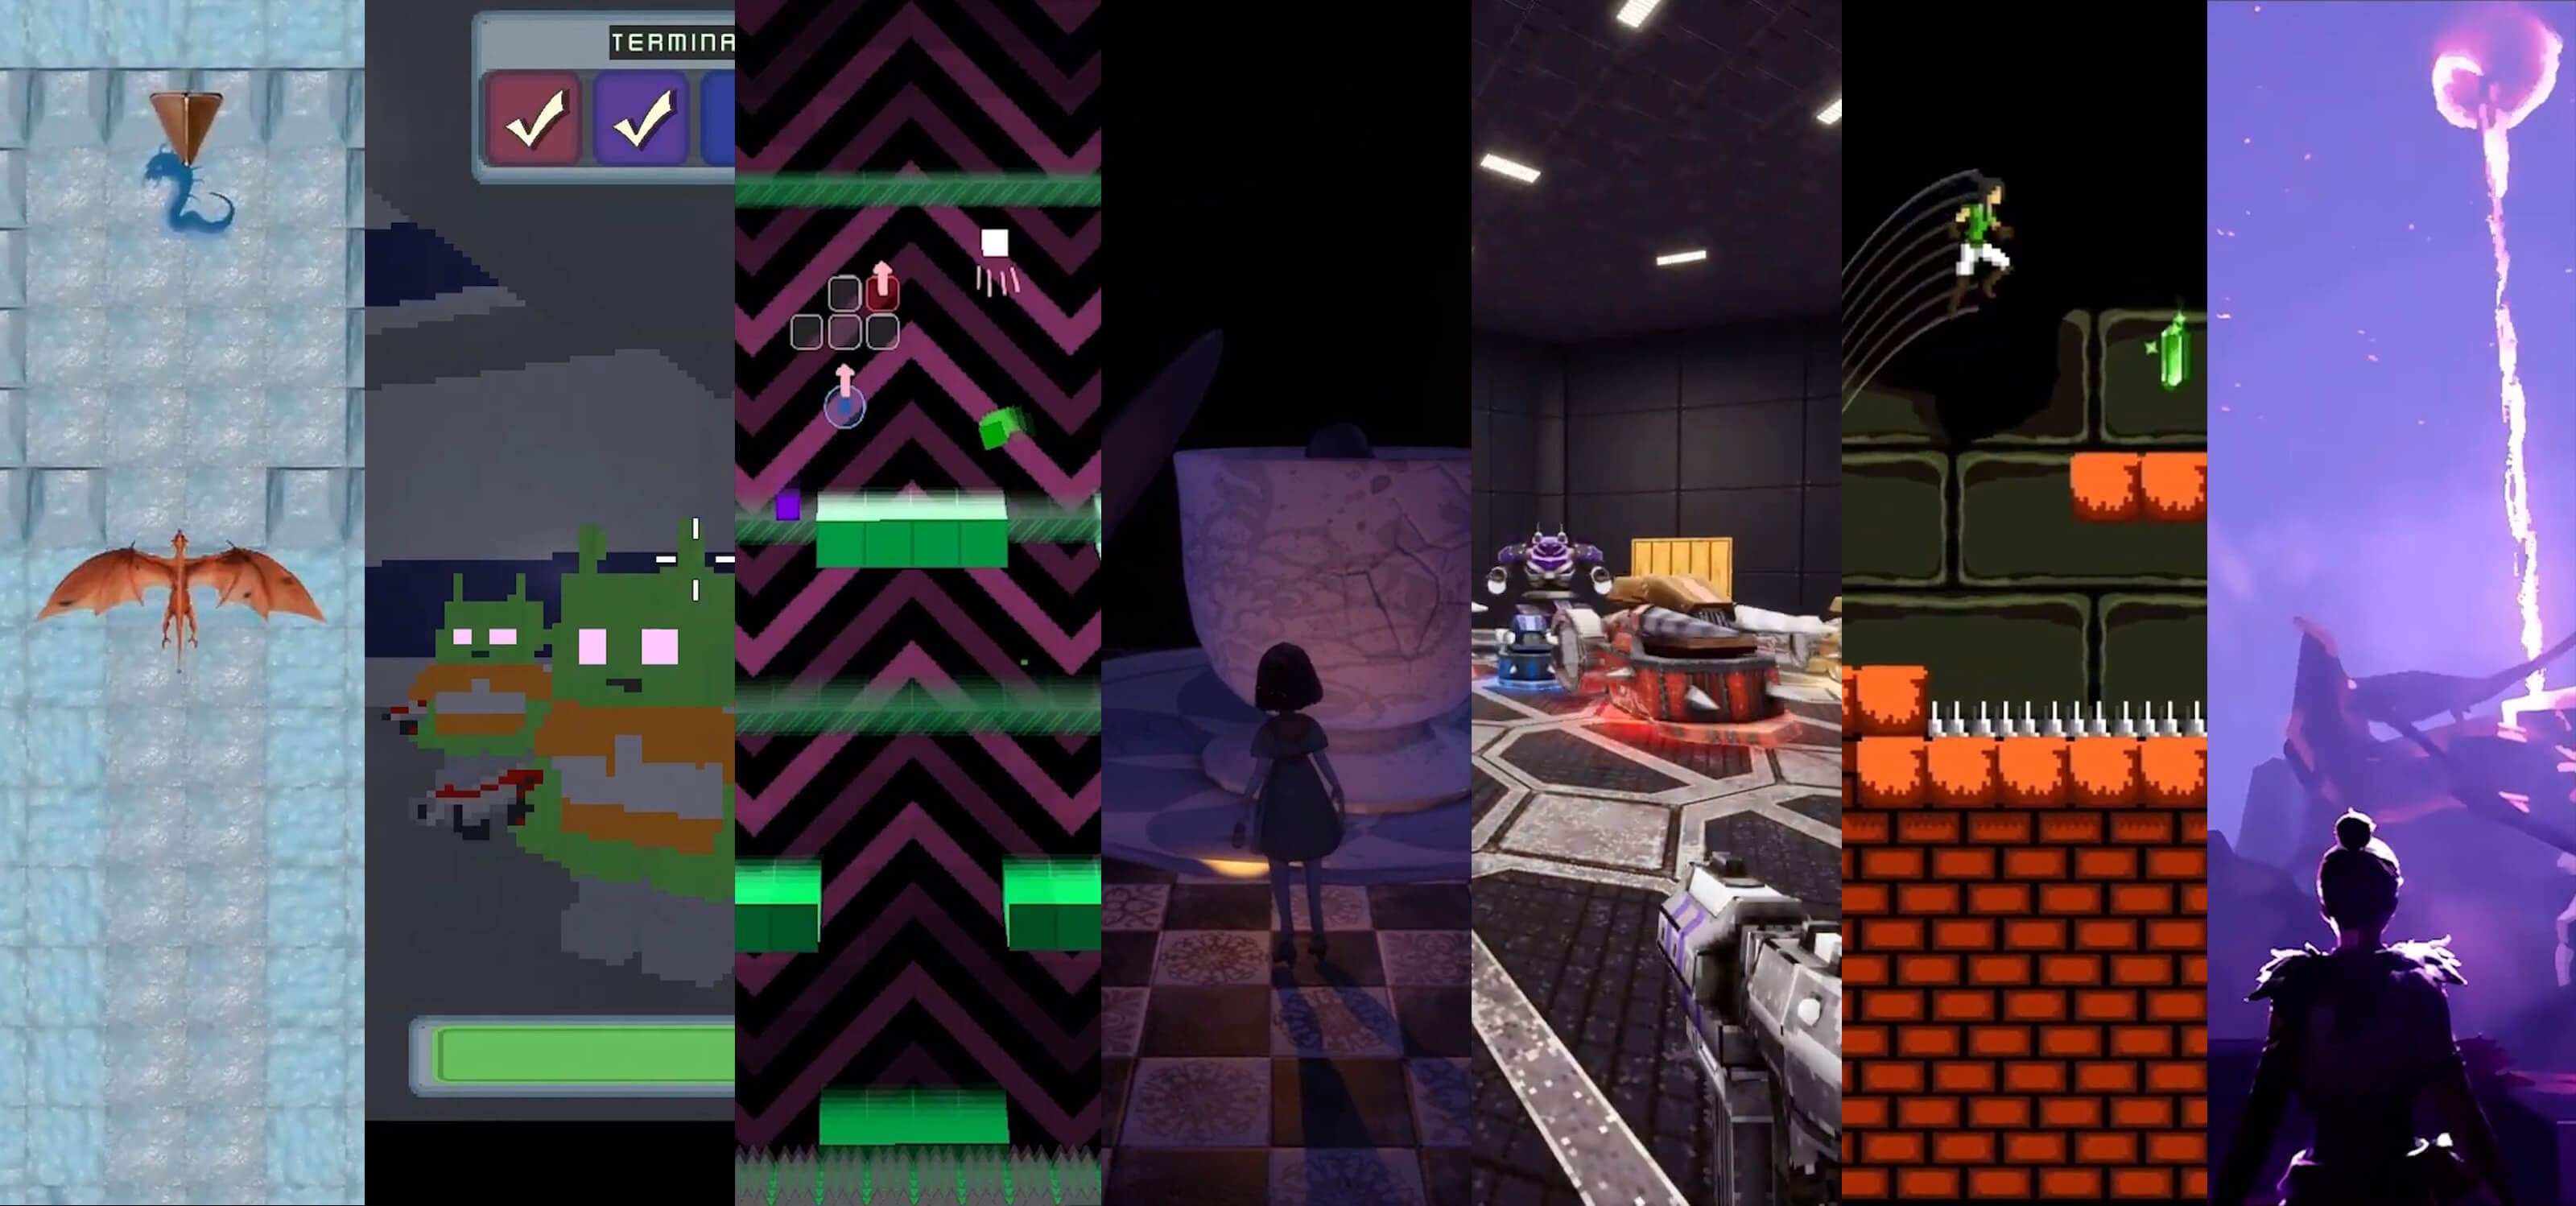 Collage of images from game screenshots, including a dragon, porcelein doll, blocks, and aliens.